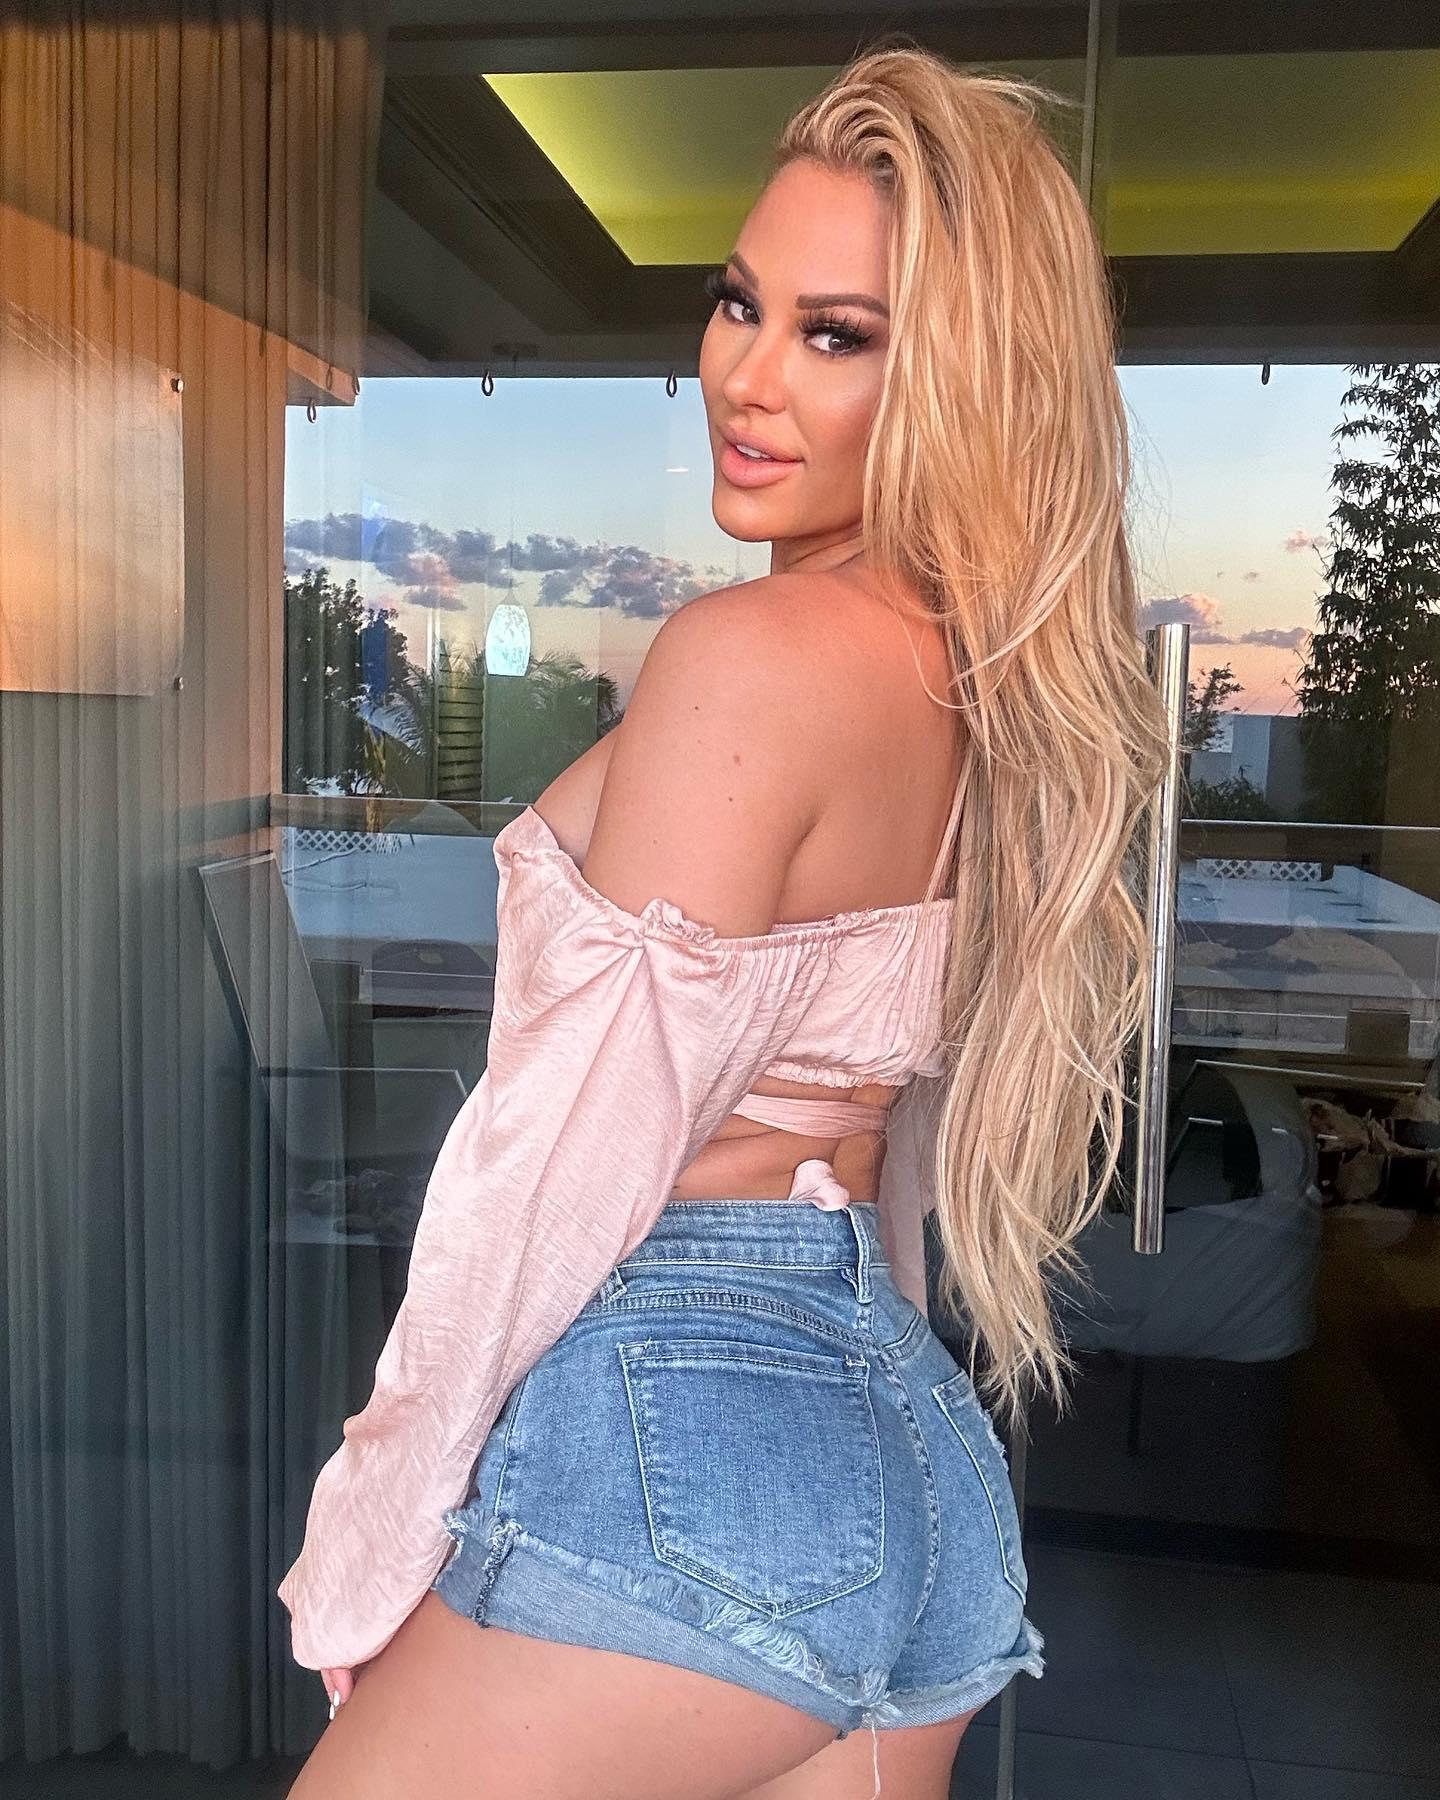 Kindly Myers poses in daisy dukes and a revealing top in Mexico